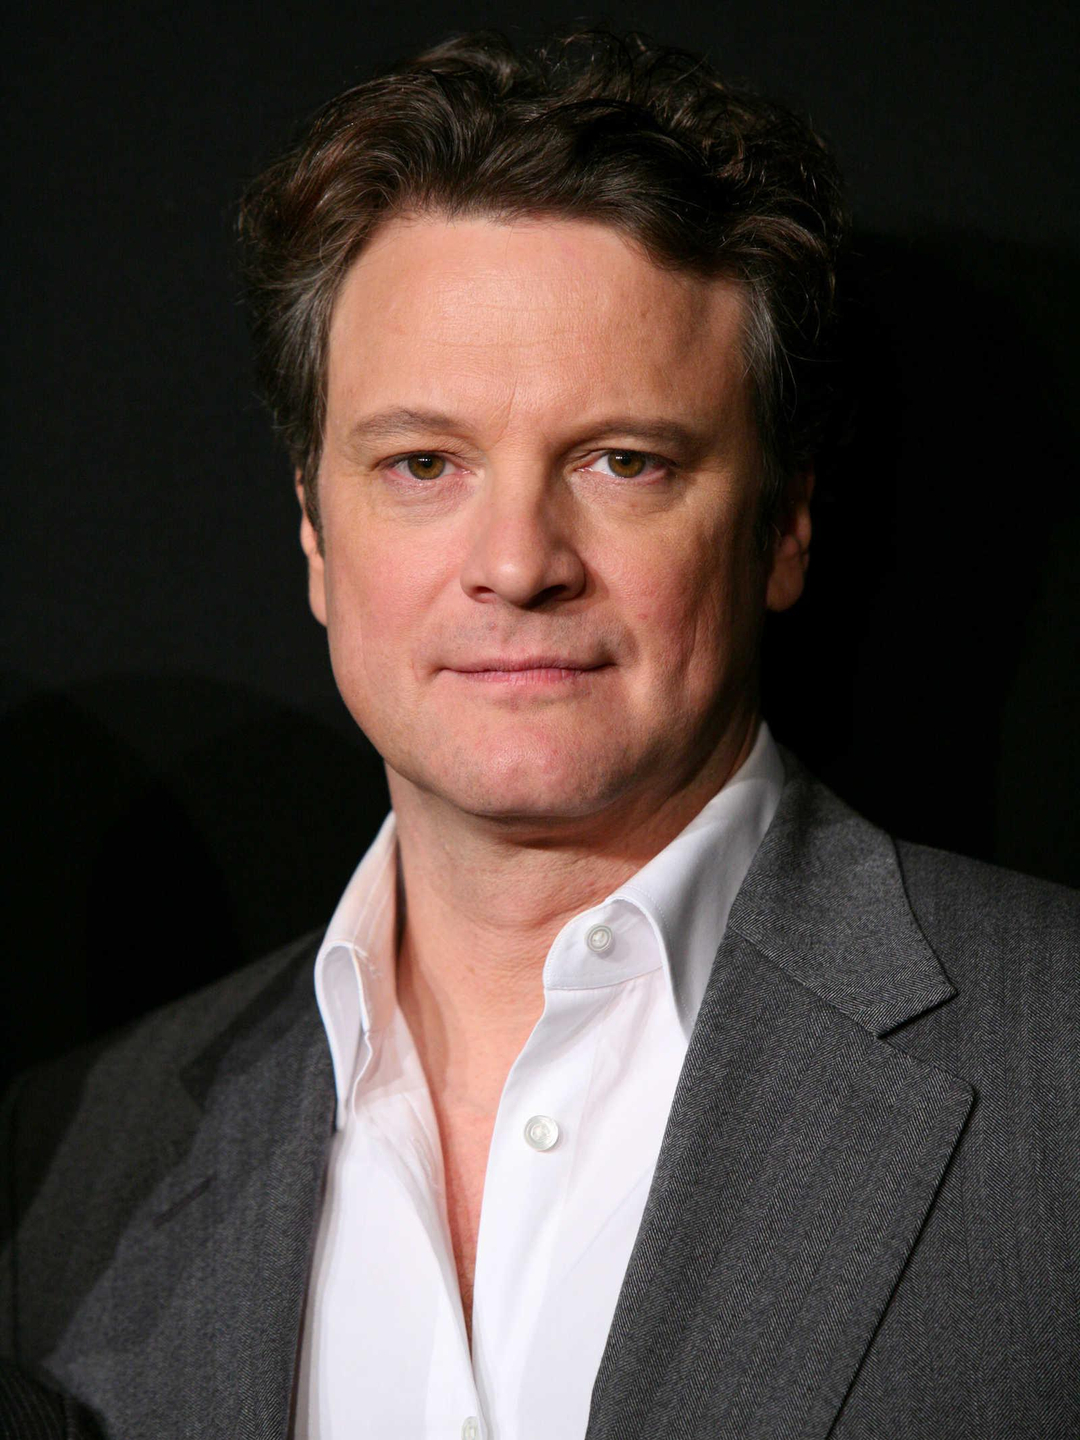 Colin Firth early childhood